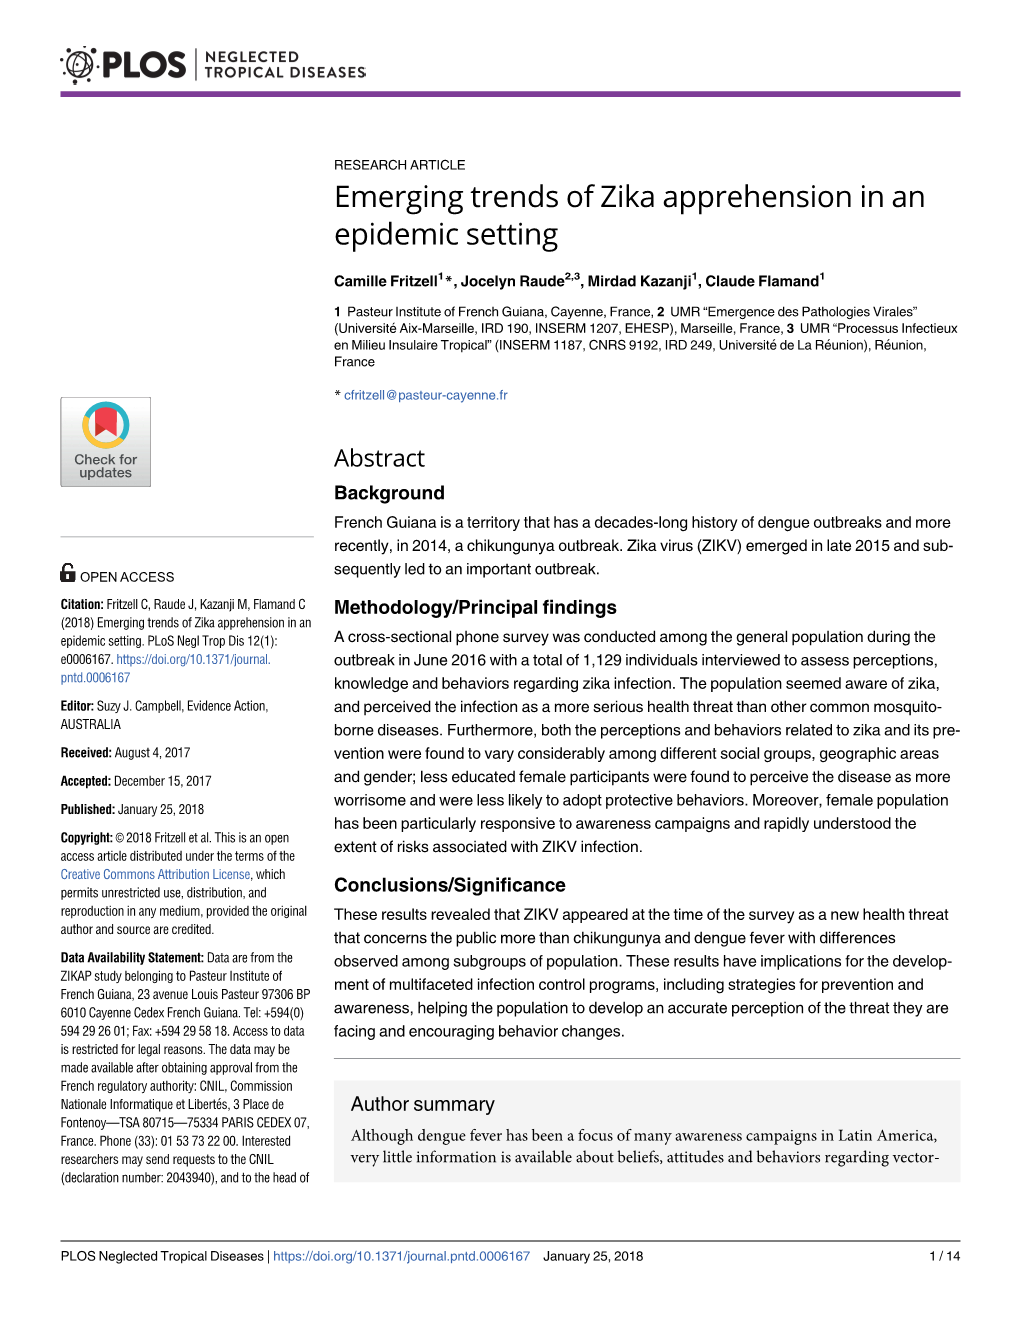 Emerging Trends of Zika Apprehension in an Epidemic Setting